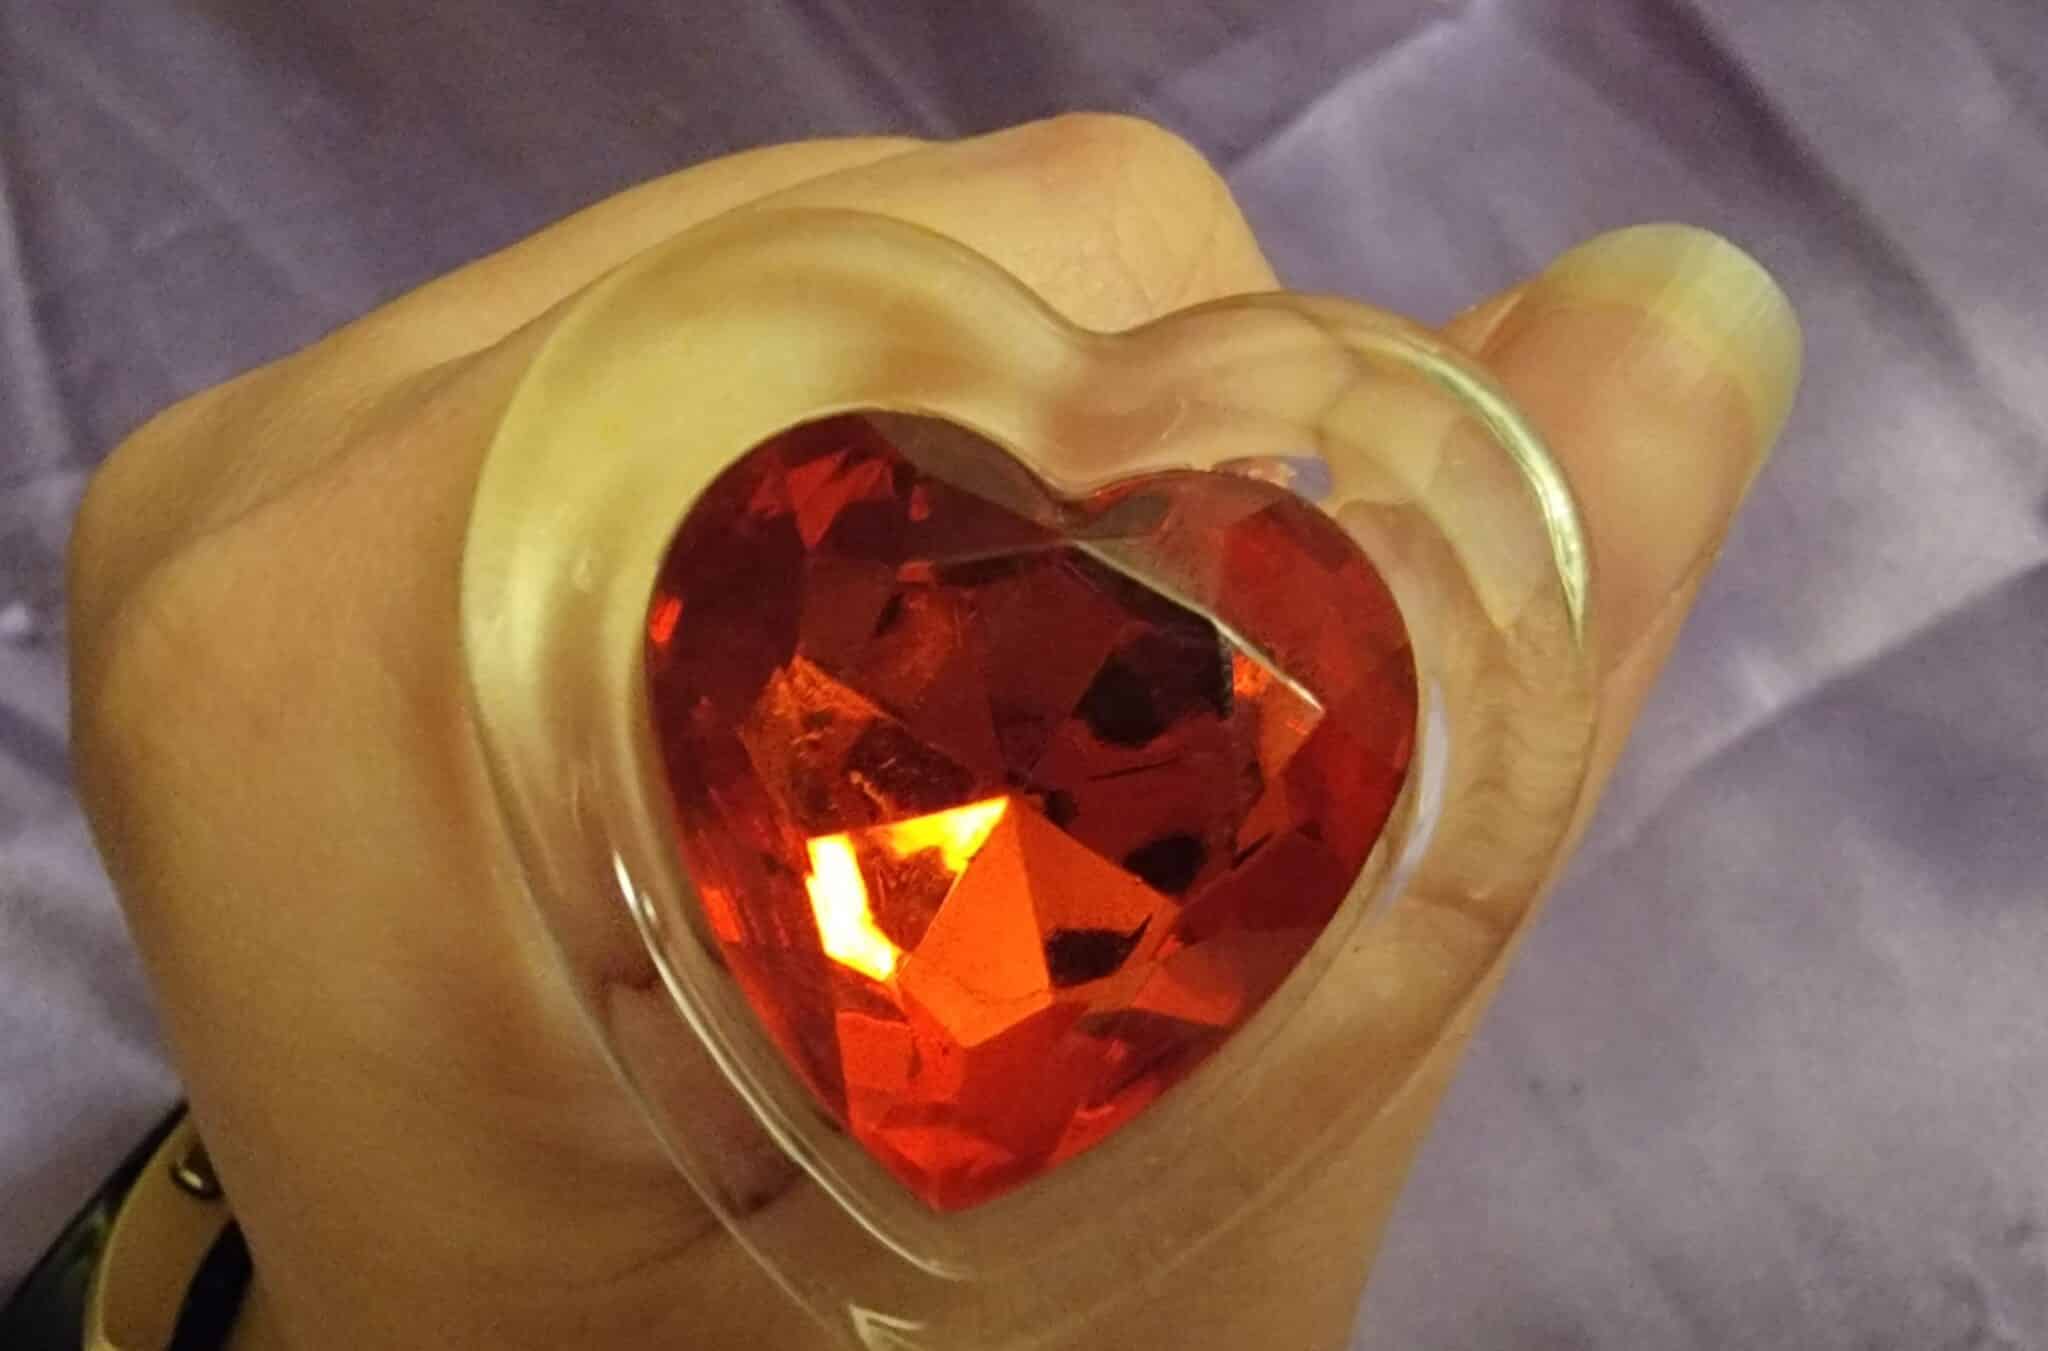 Booty Sparks Heart Gem Glass Anal Plug The Booty Sparks: Superior Quality or Just Hype?